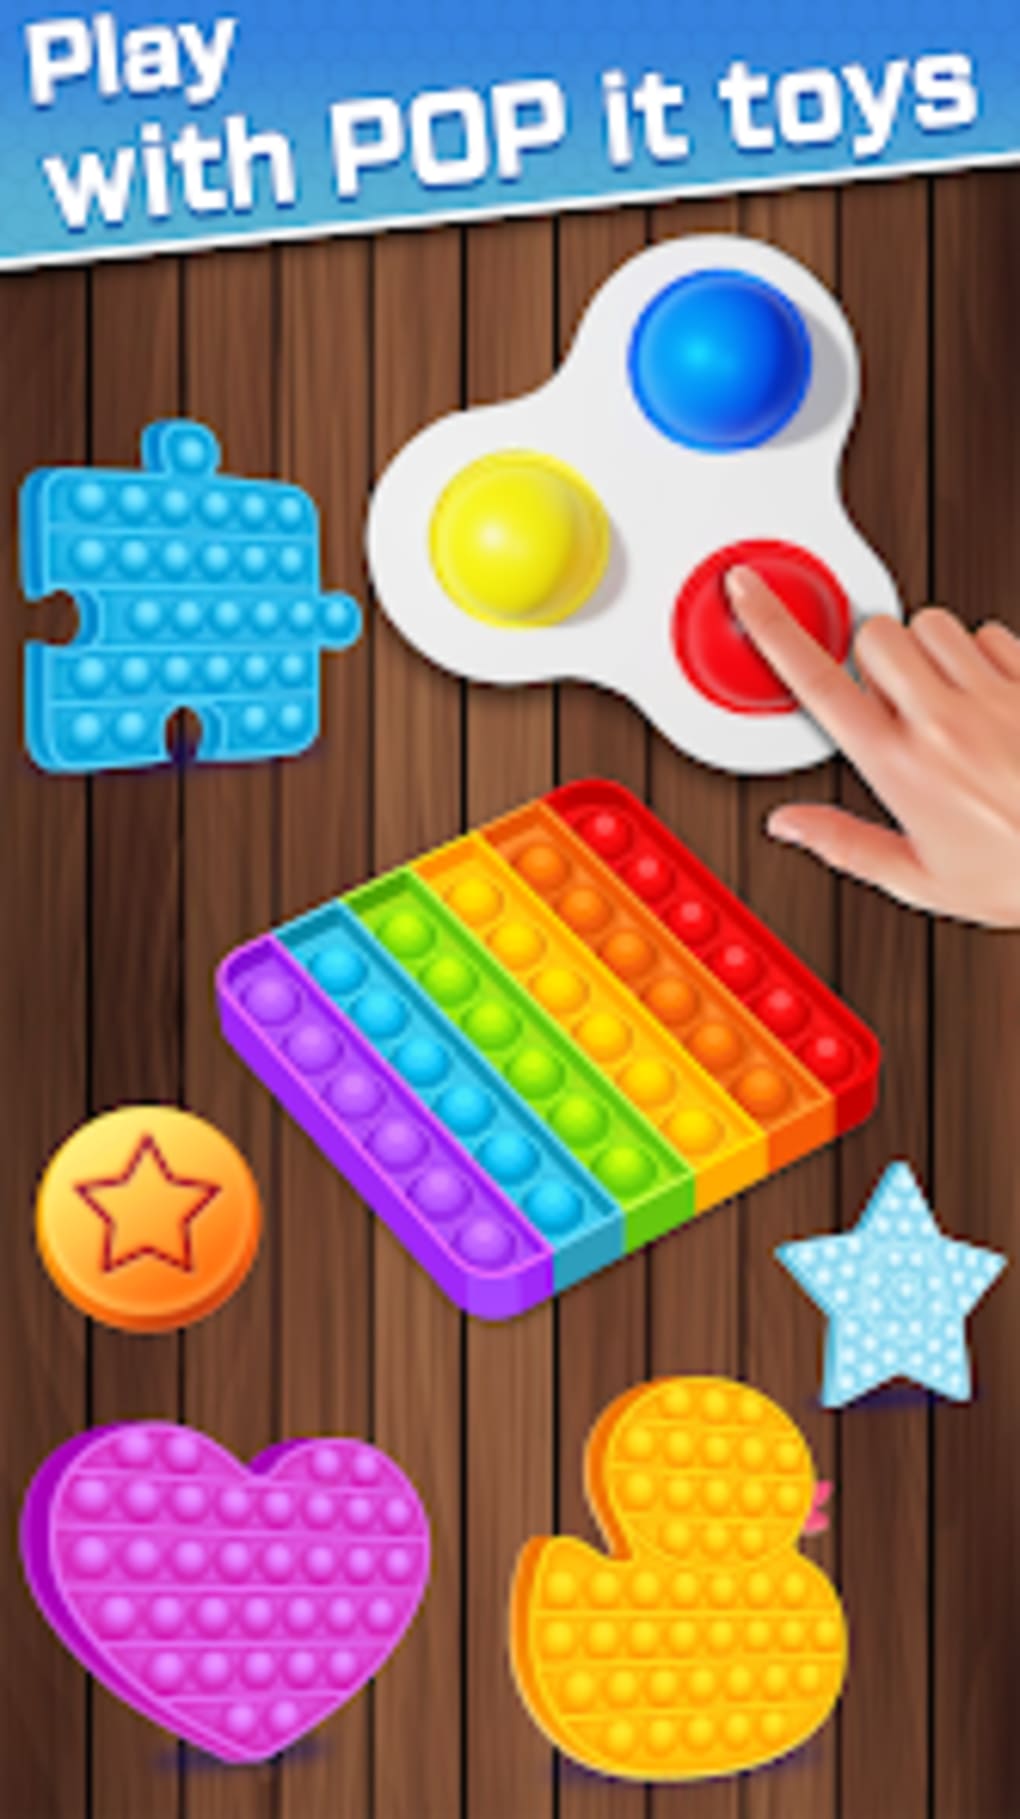 Poppit! HD, Free Online Matching Puzzle Game